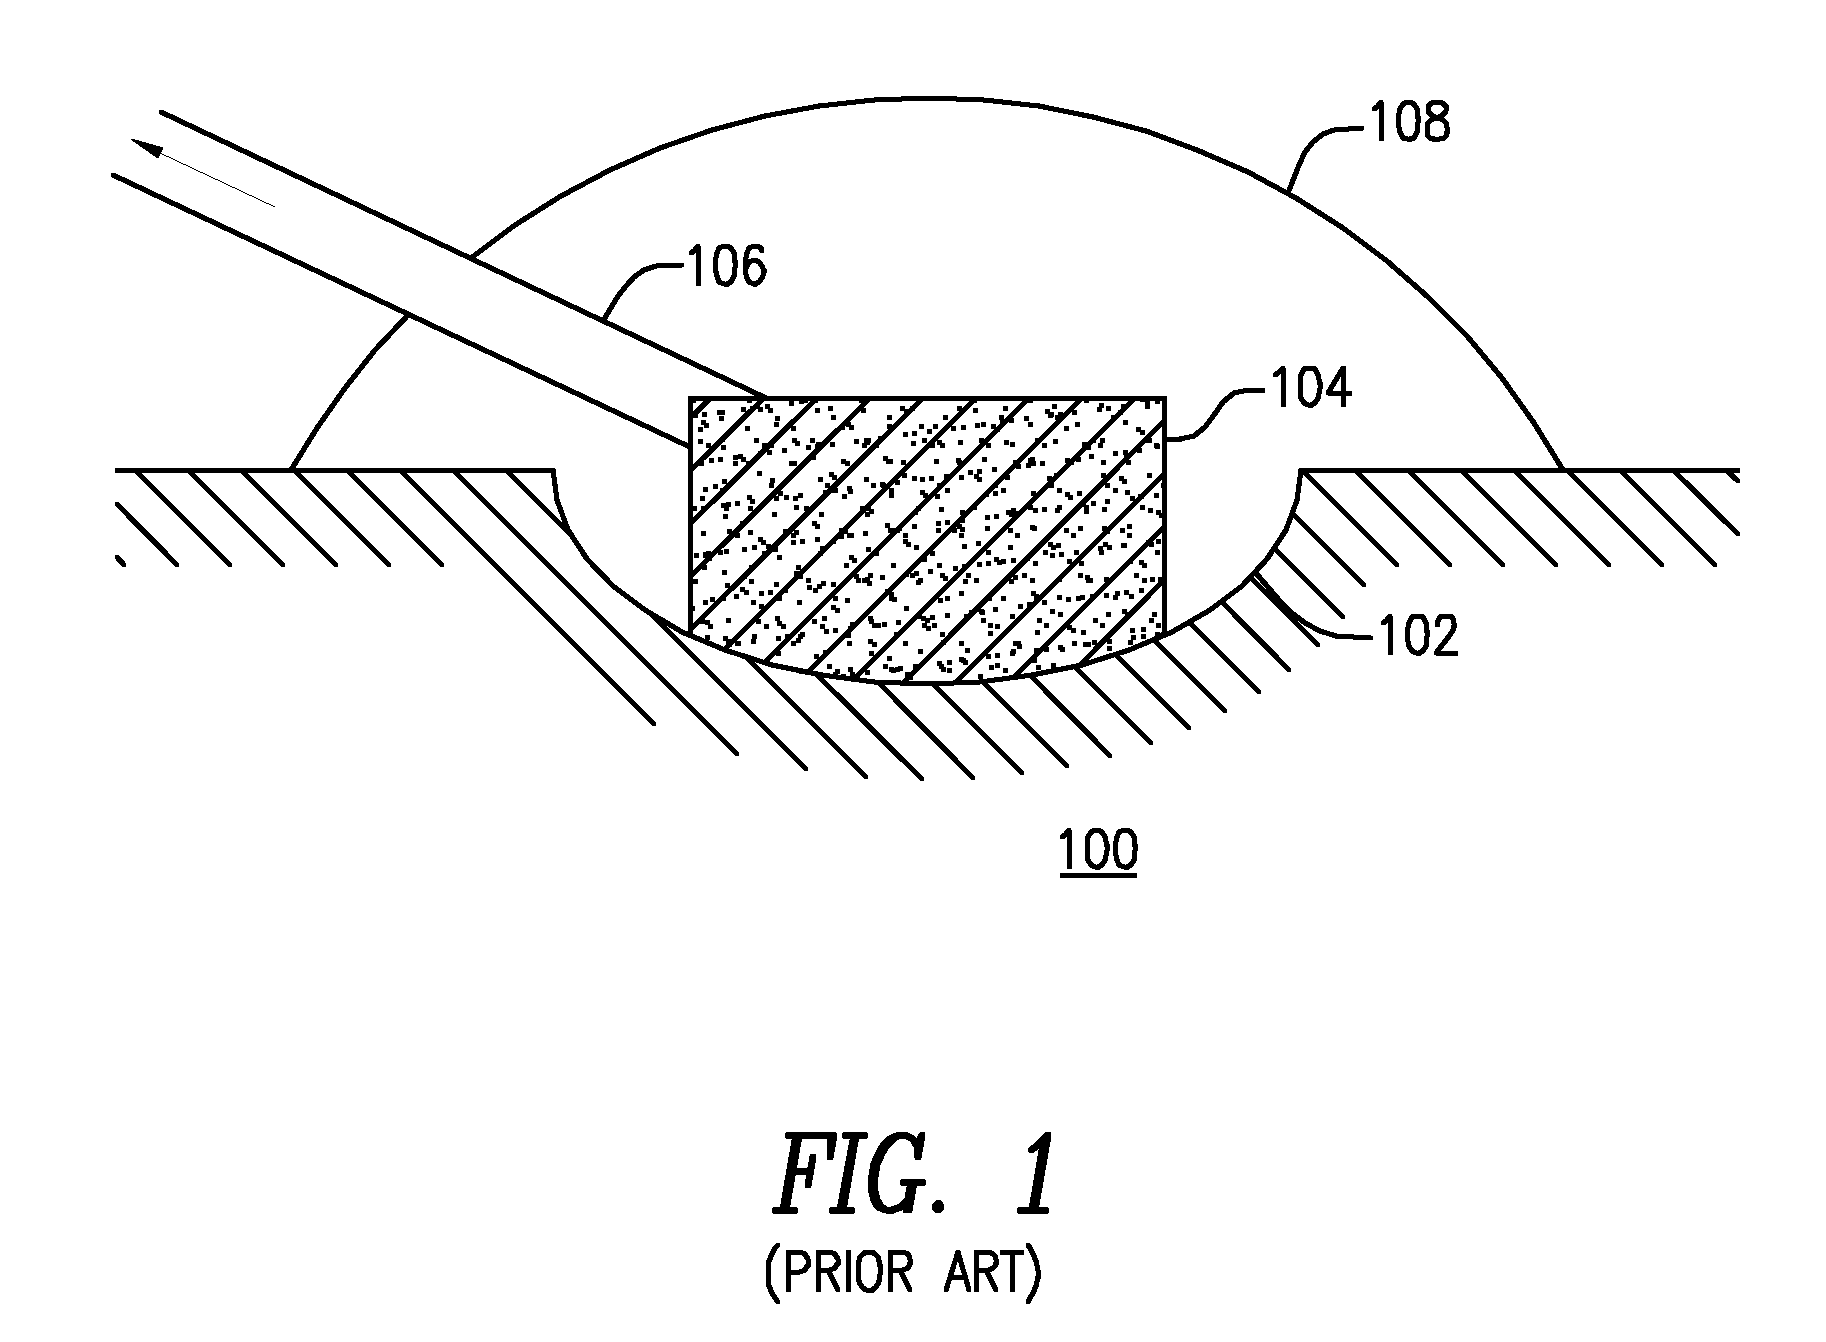 Systems and methods for providing a debriding wound vacuum